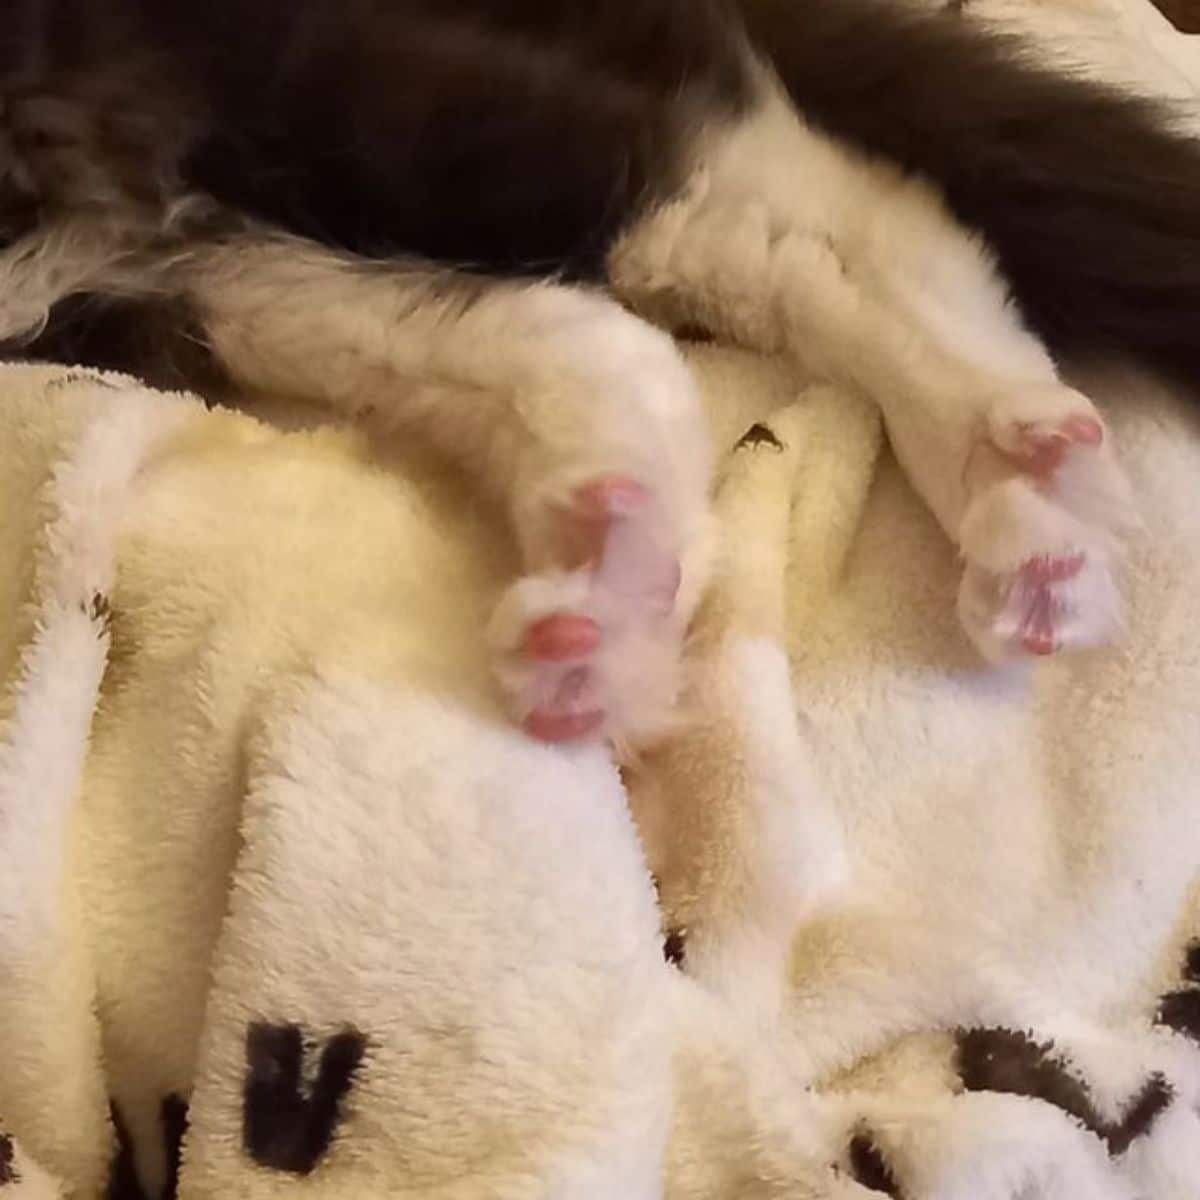 A close-up of cute maine coon paws on a blanket.